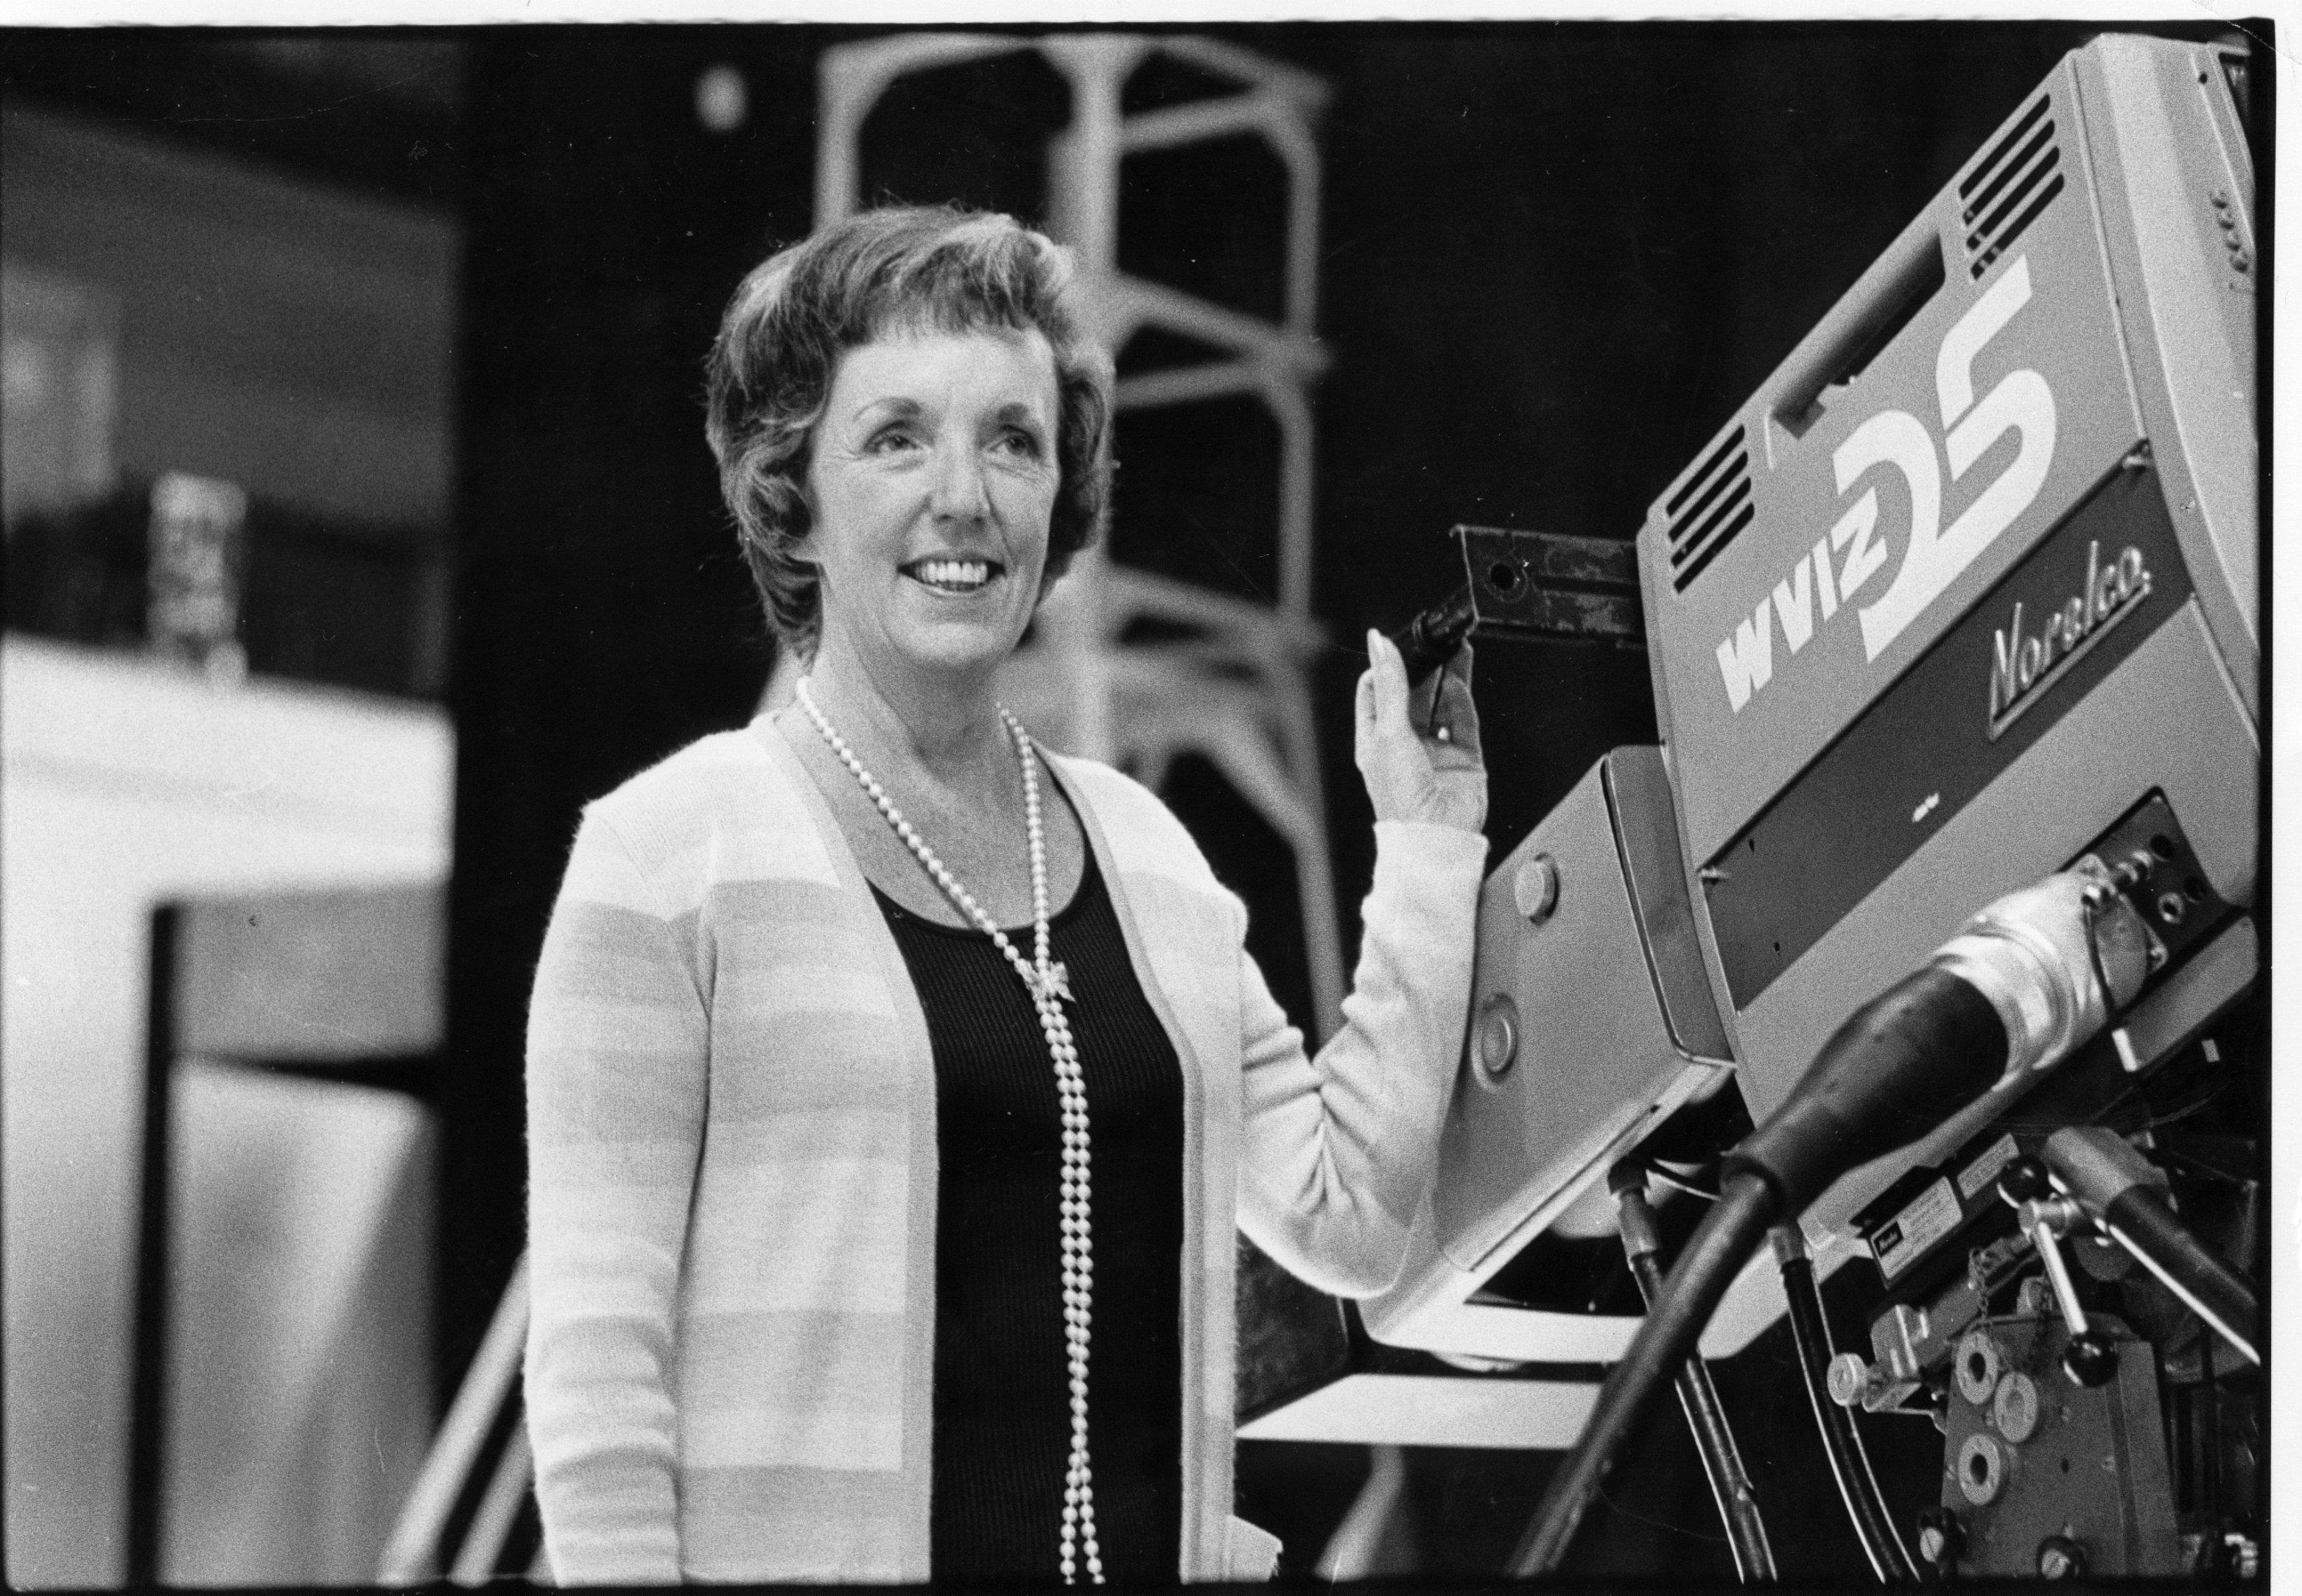 Betty Cope, founding president of WVIZ Channel 25 and television pioneer, with camera on the set of WVIZ.